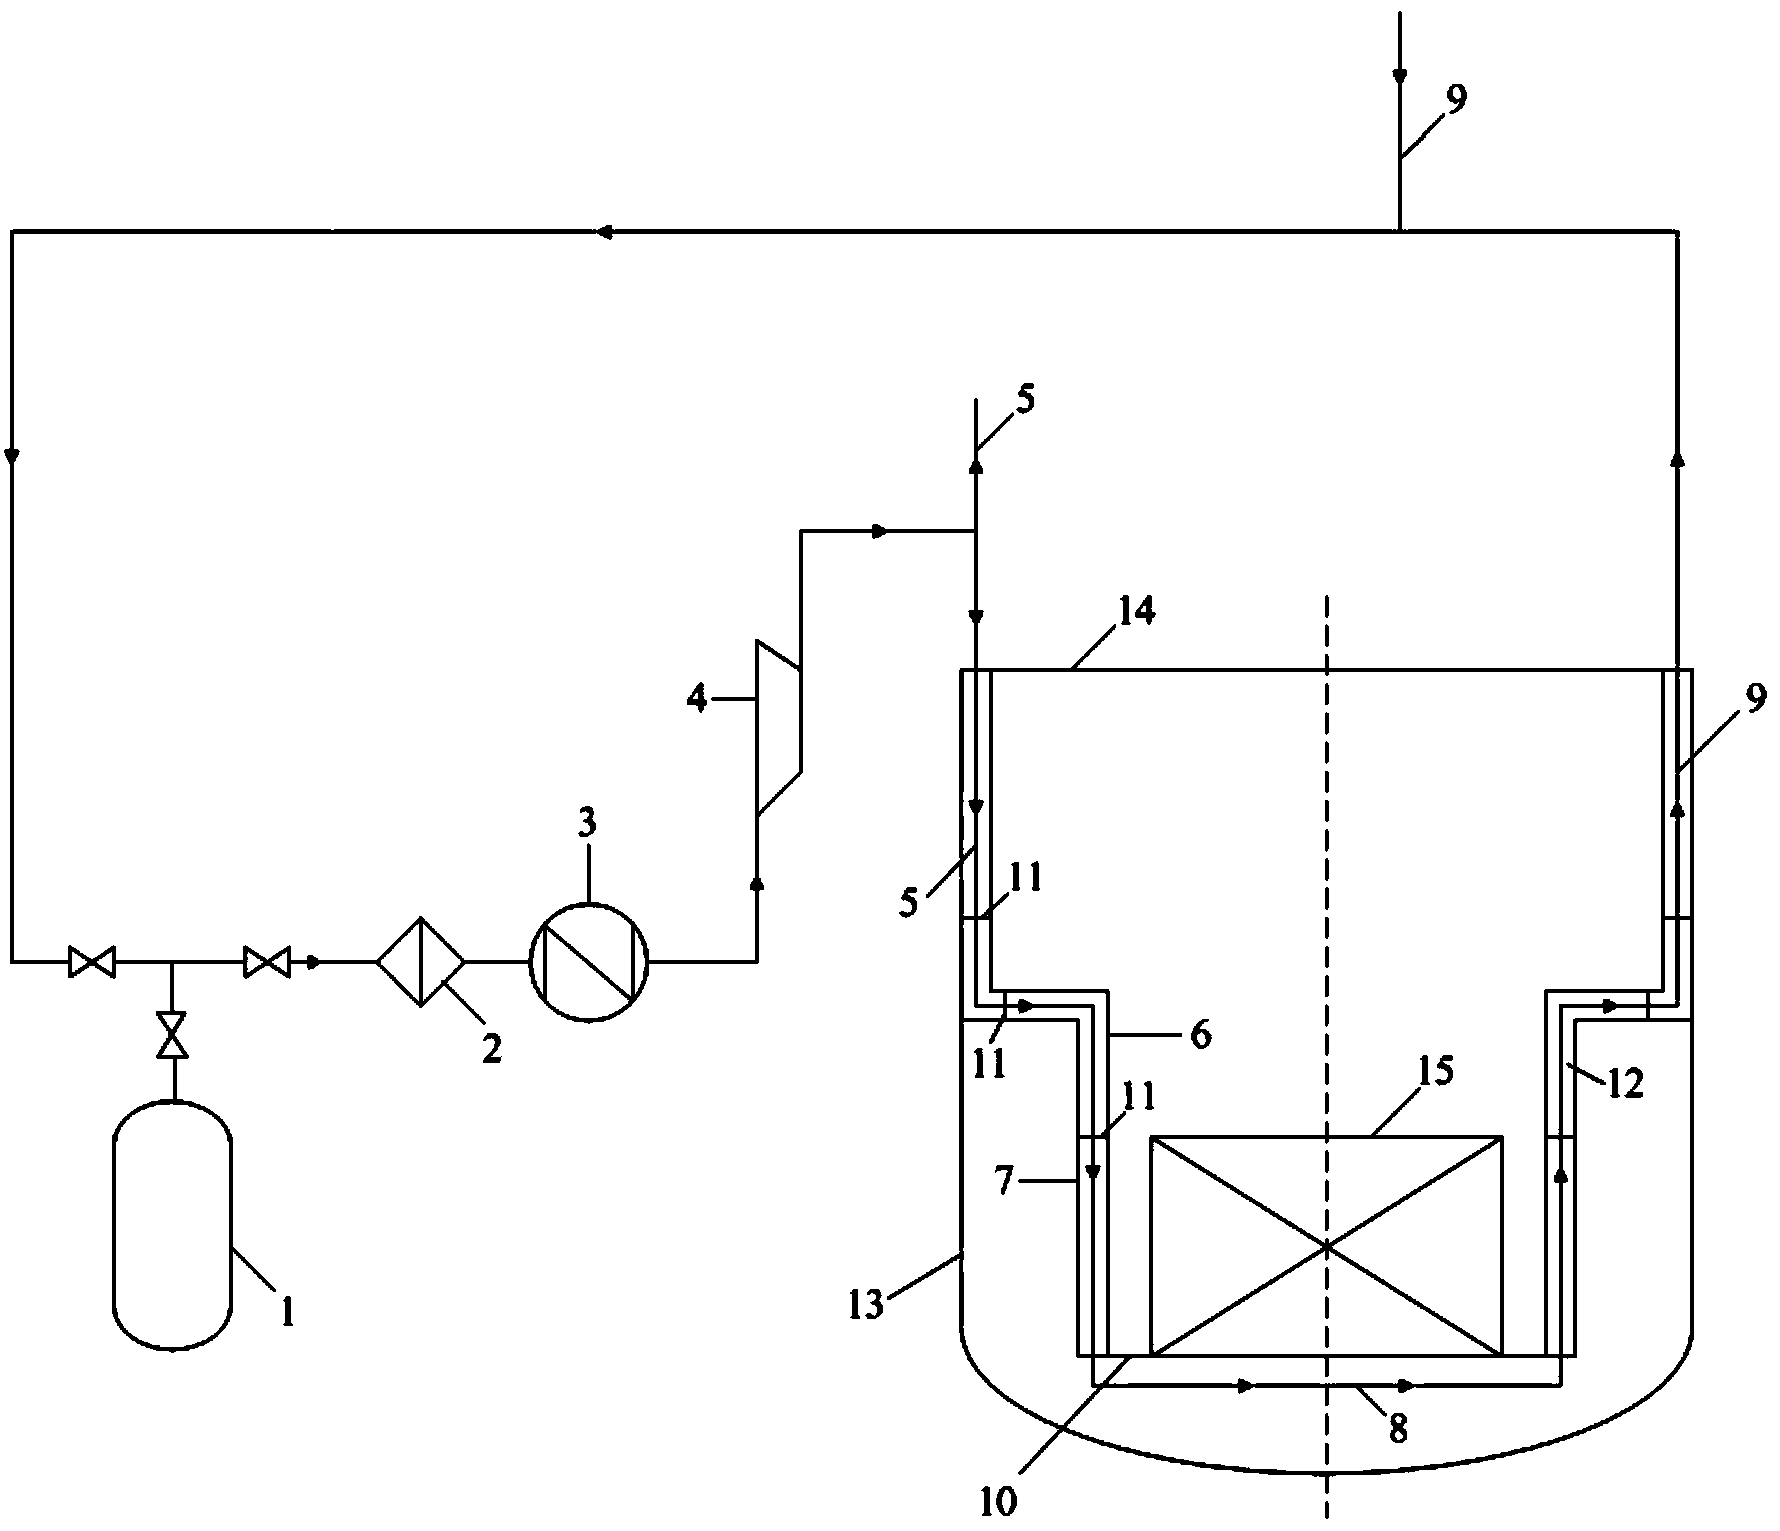 Auxiliary heating system in liquid state heavy metal cooling natural circulating pool type reactor